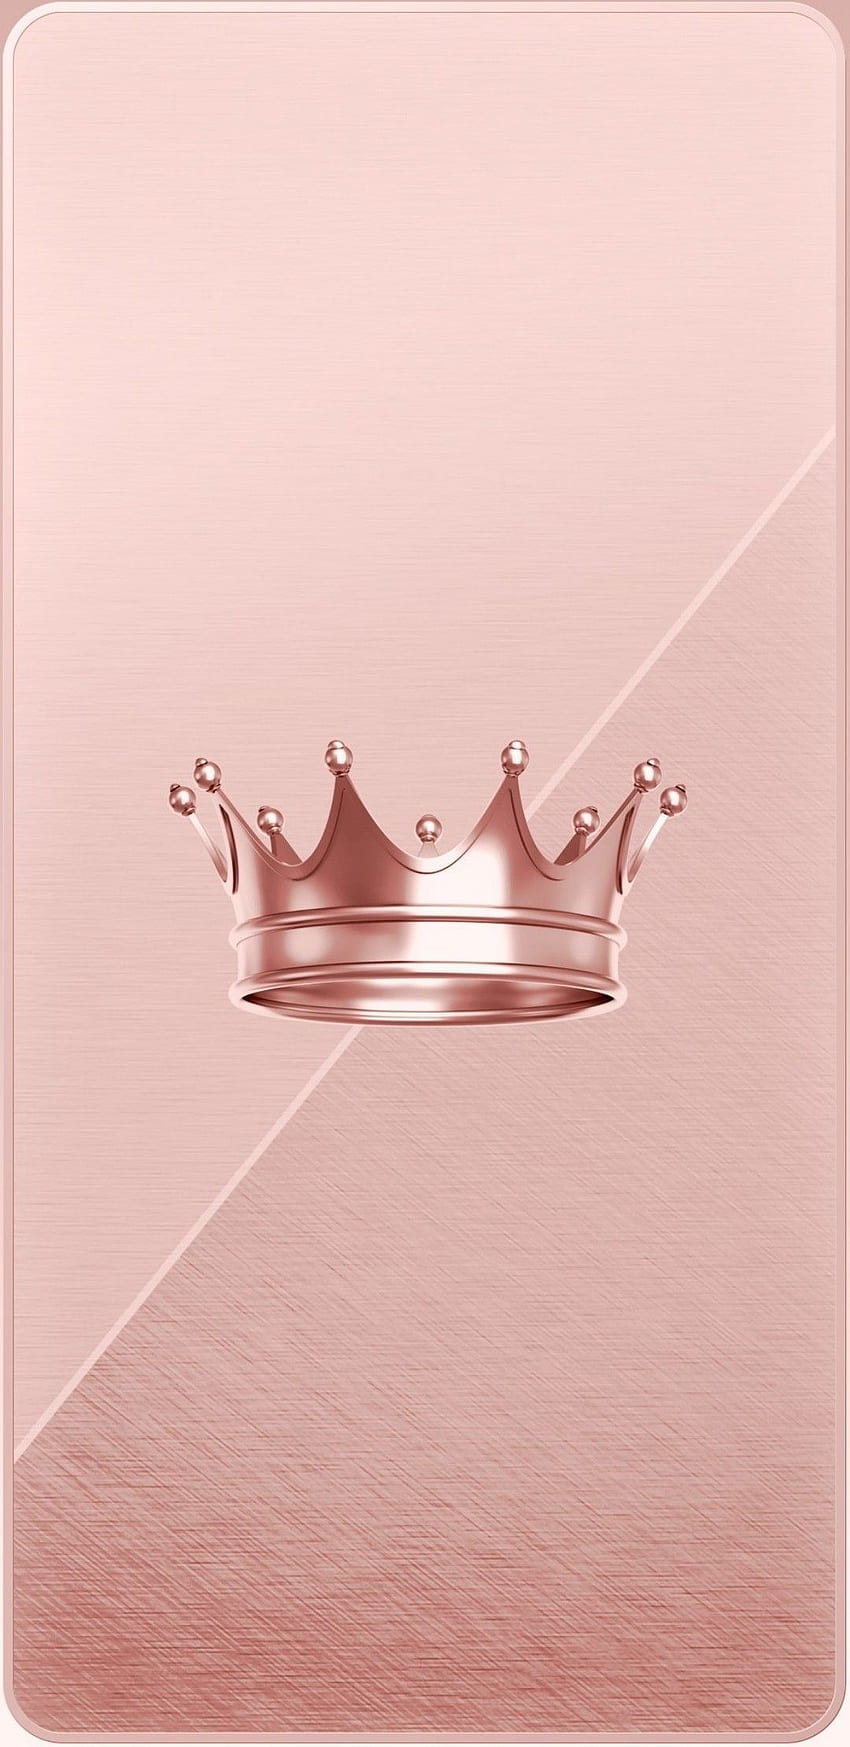 A rose gold crown on a rose gold background - Crown, rose gold